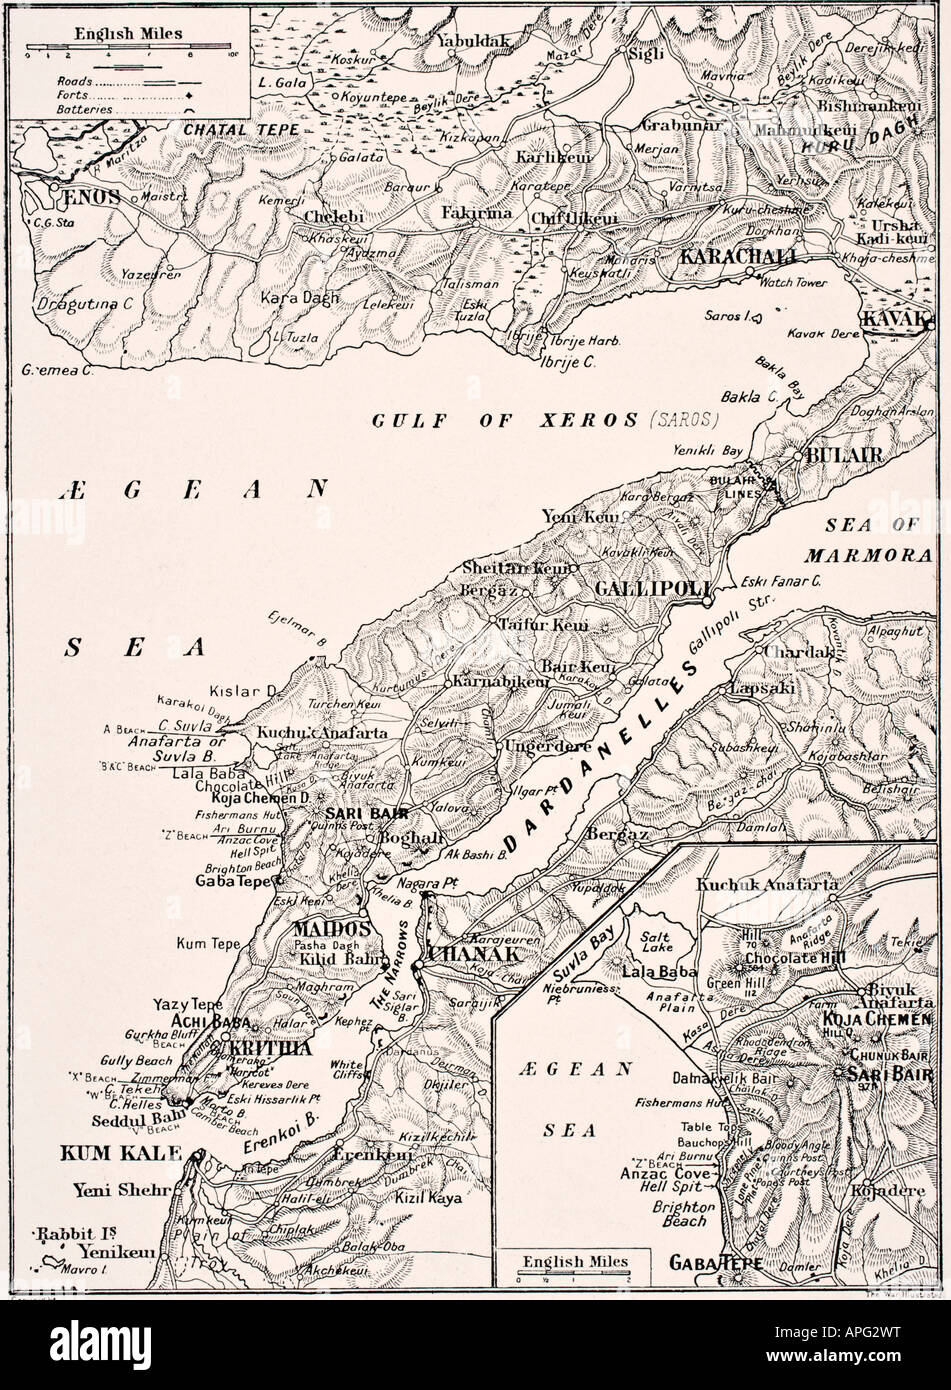 Detailed map of the Gallipoli Peninsula and the Dardanelles, Turkey in 1915 showing British and Allied landing beaches. Stock Photo